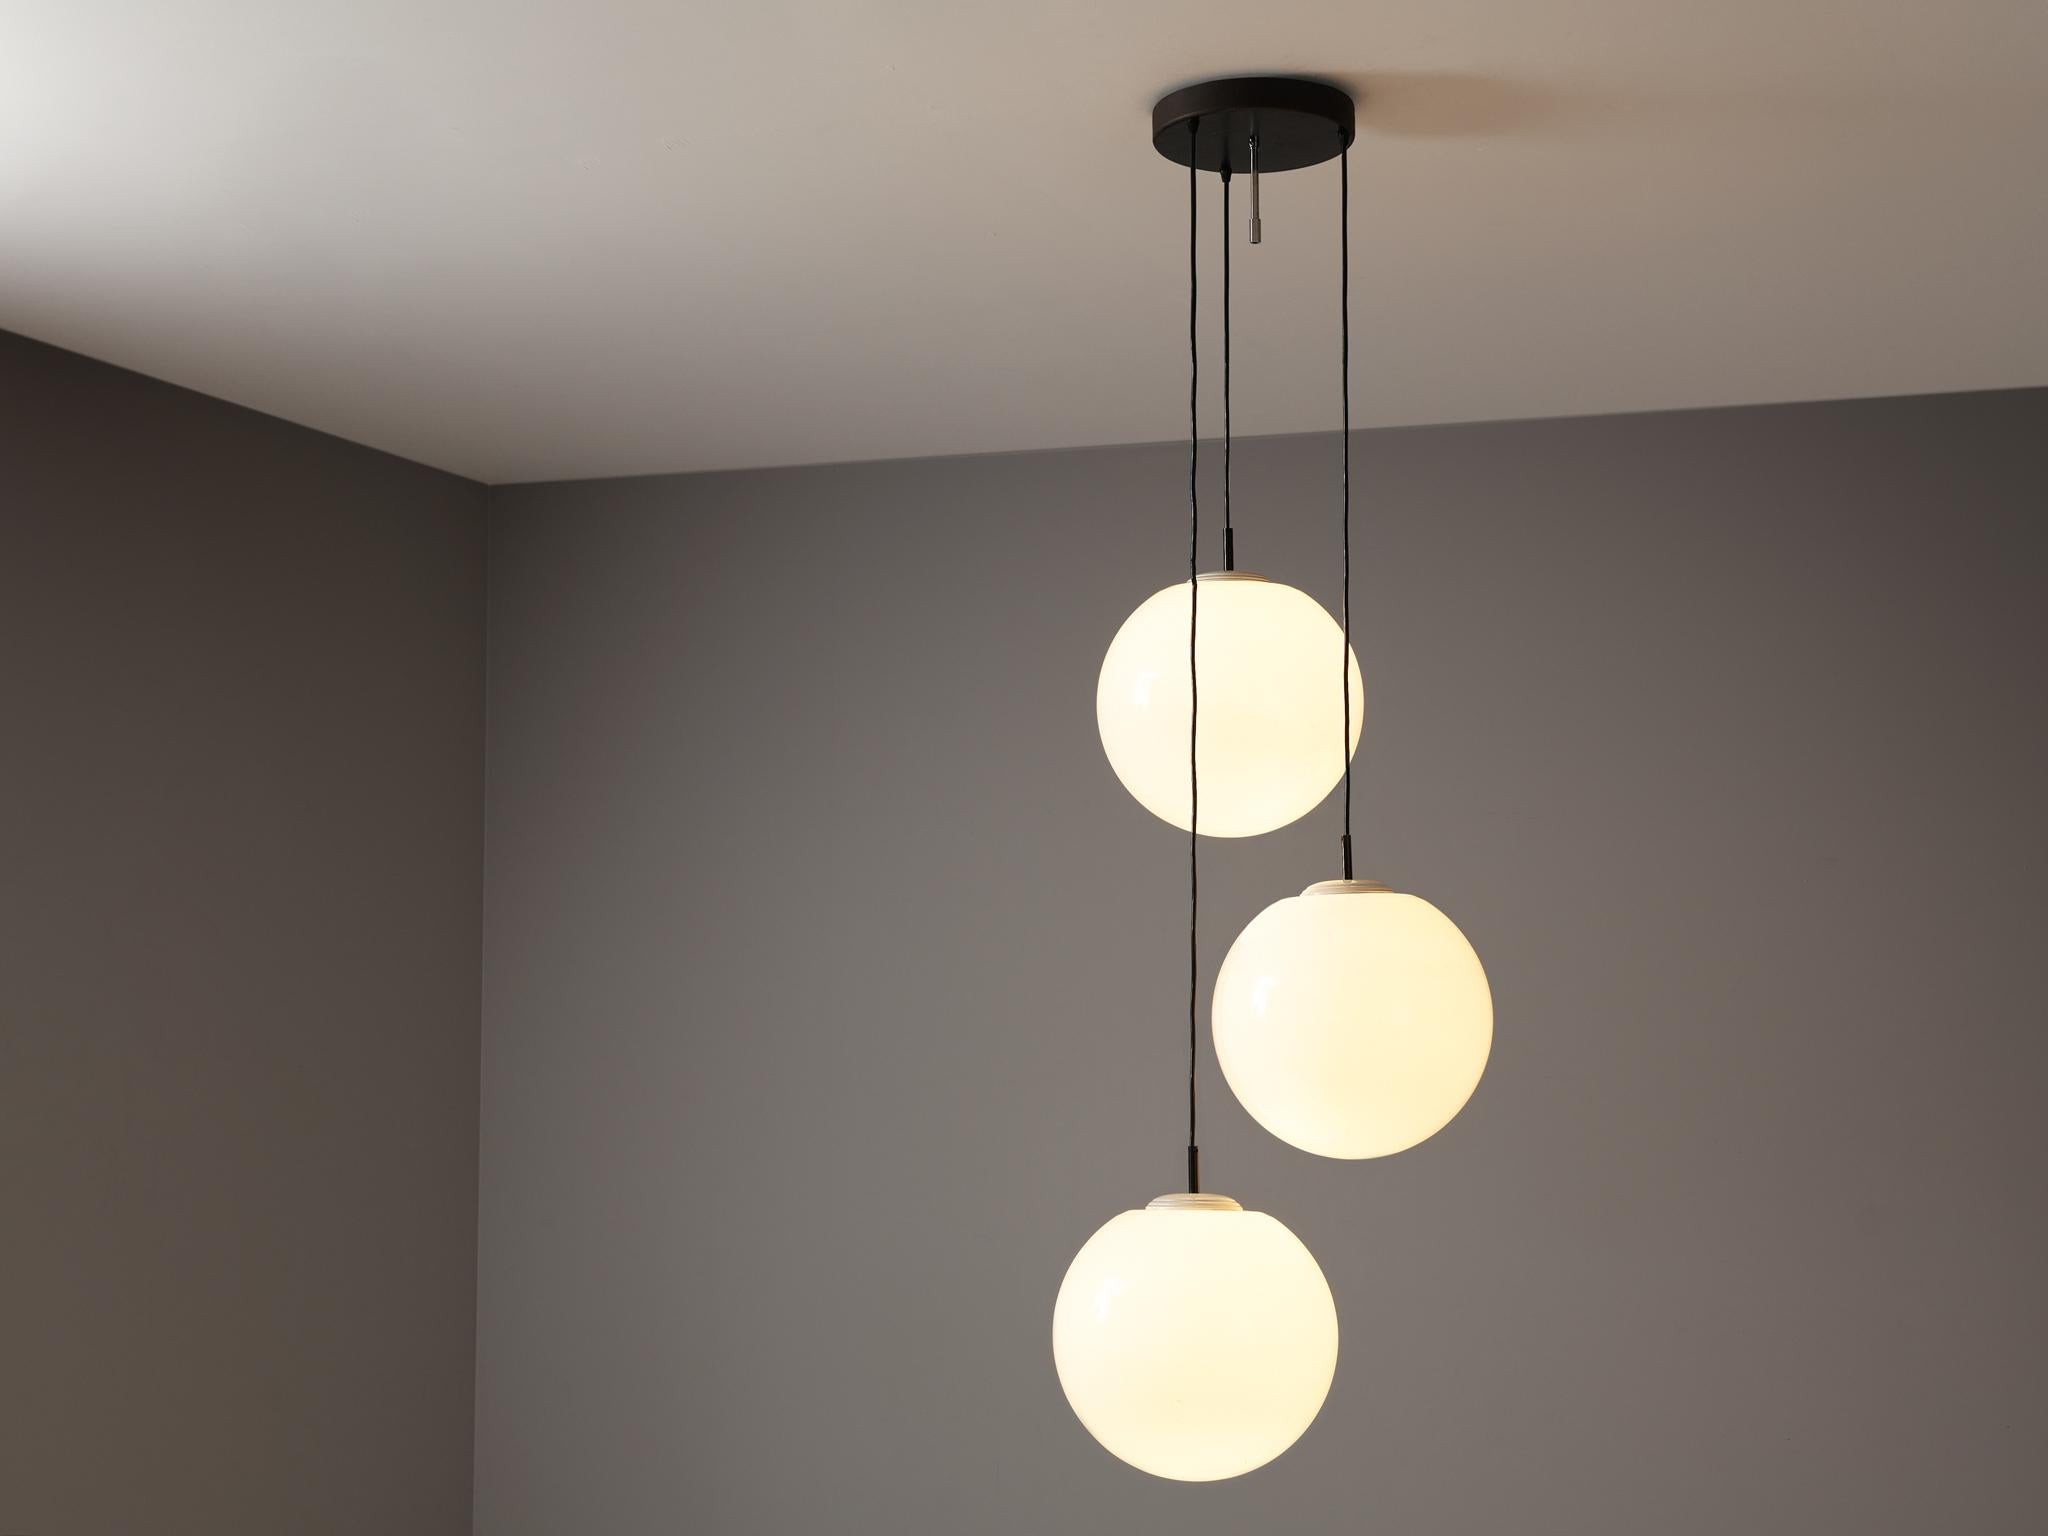 Pendant with three spheres, glass, lacquered metal, Europe, 1960s

A sophisticated pendant made in Europe in the 1960s. The composition of this light is arranged by three large spheres in white glass, arranged in a spiral form. Each shade is